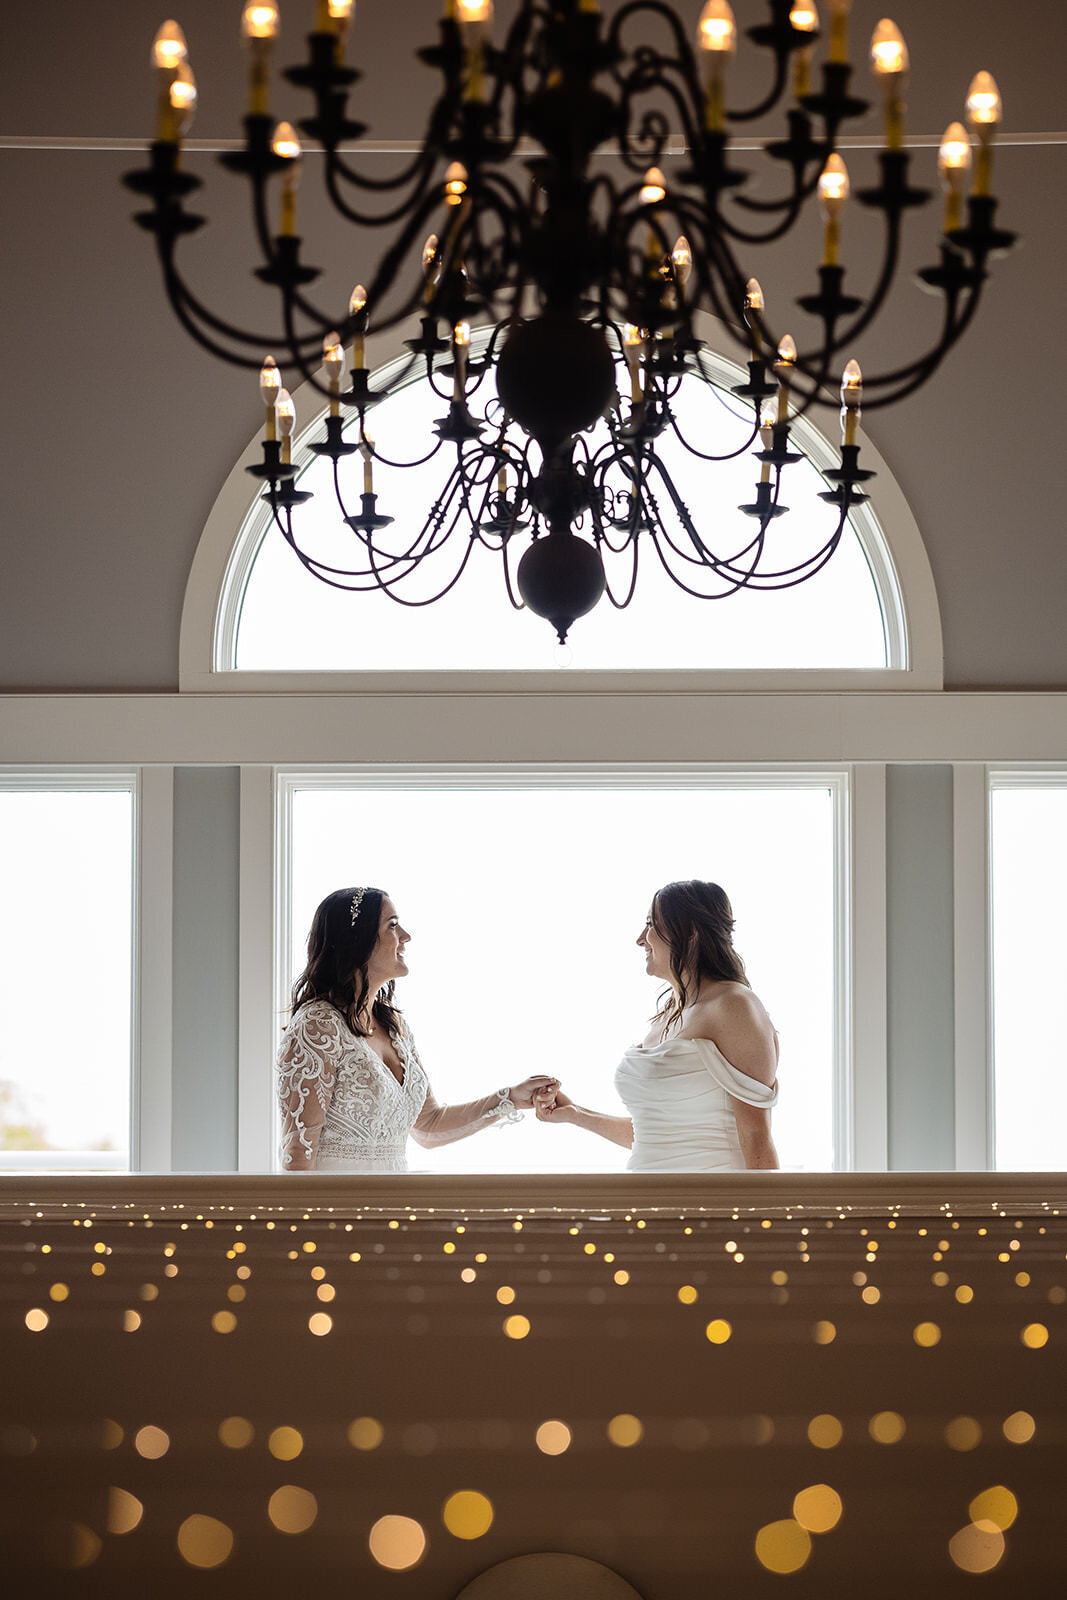 Two brides holding hands under a grand chandelier, silhouetted against a large window with soft golden light spilling in.